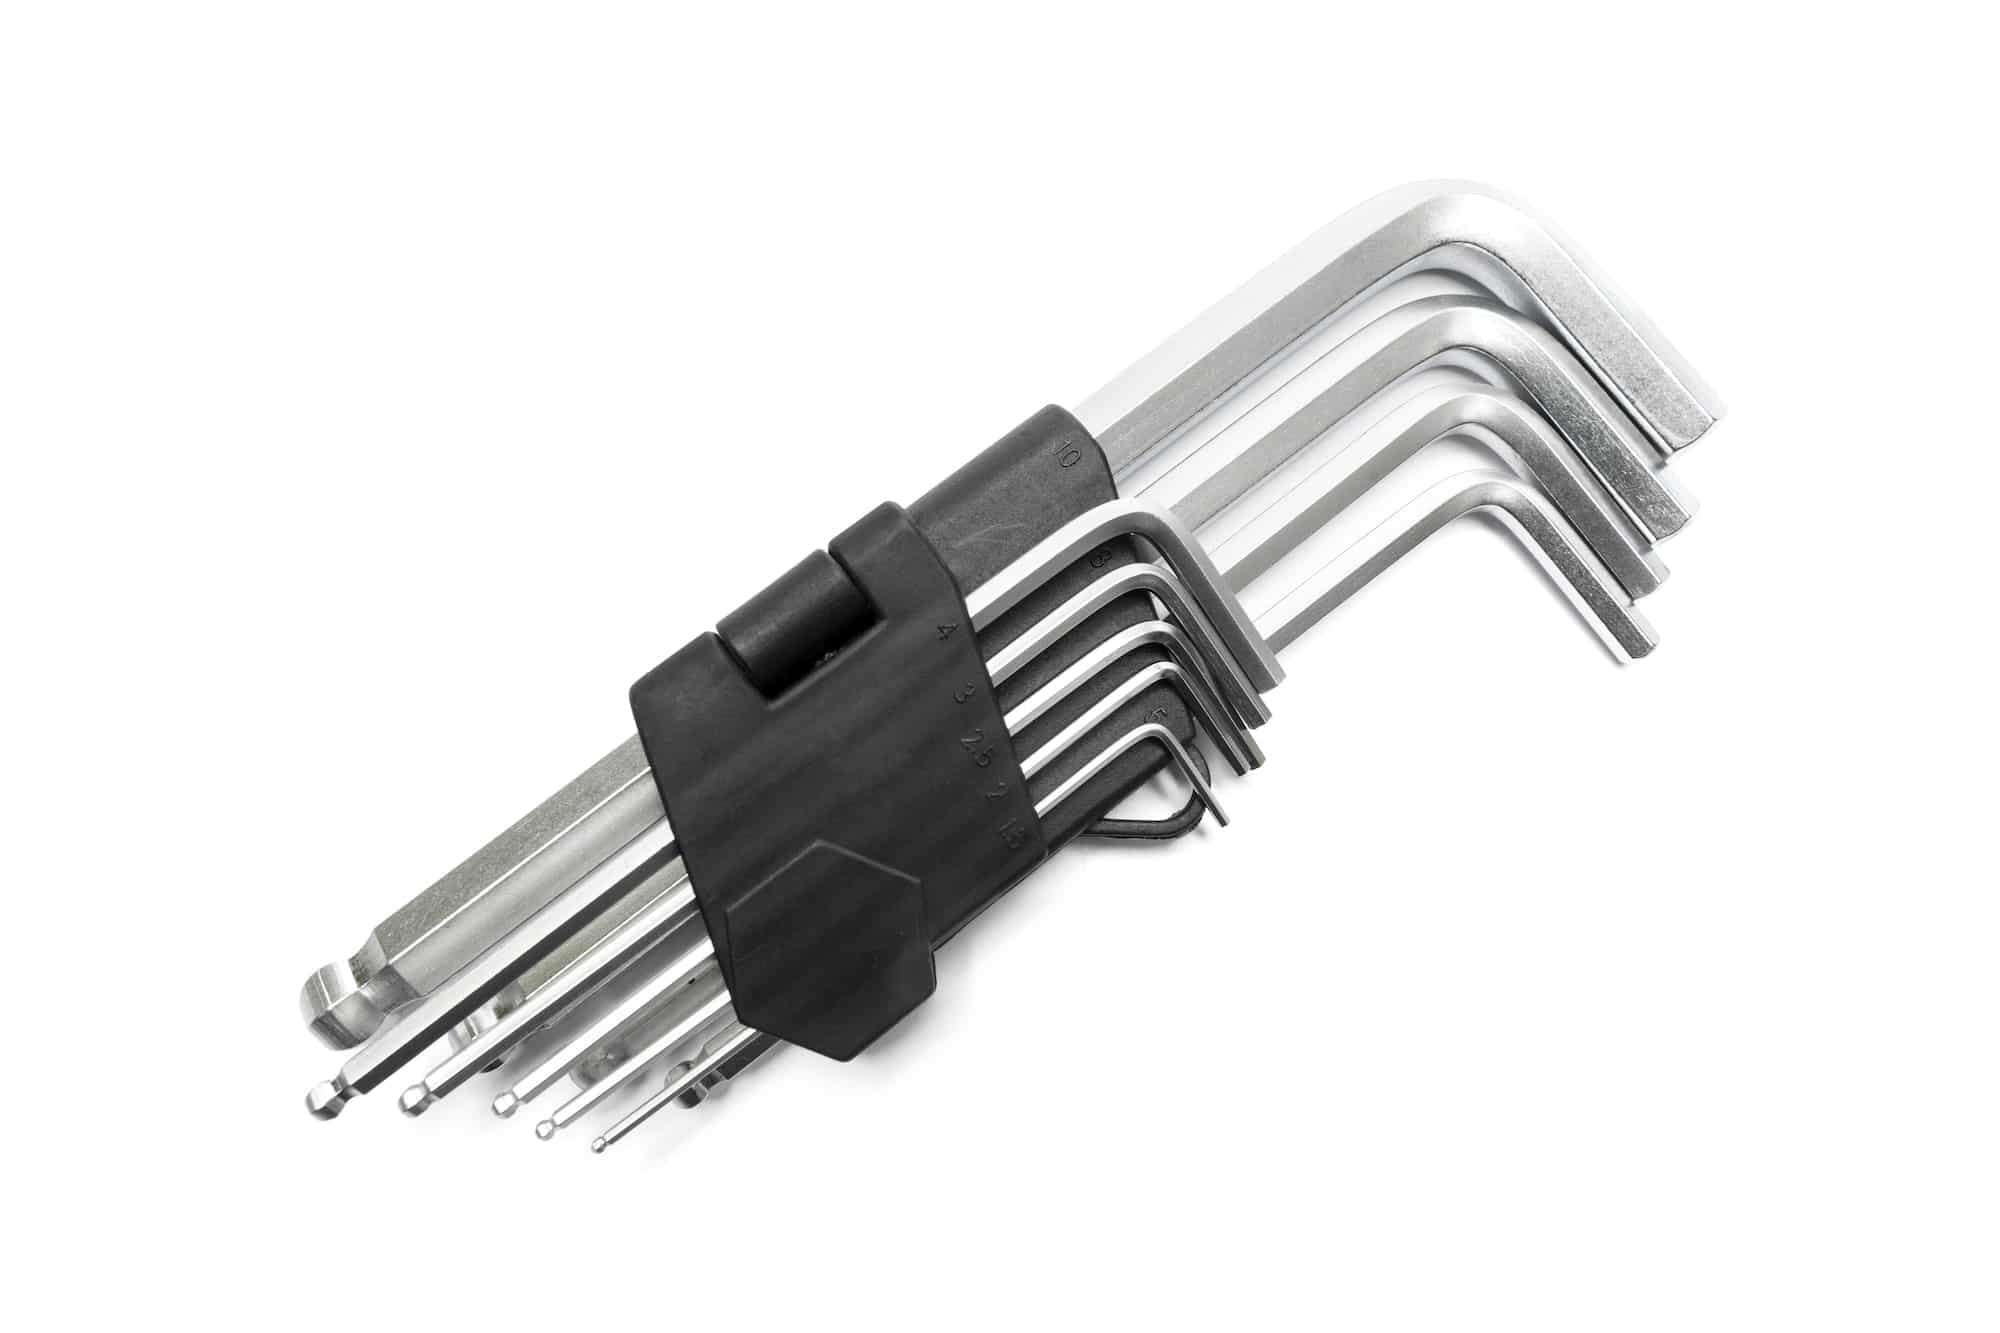 Word from hex keys on white background